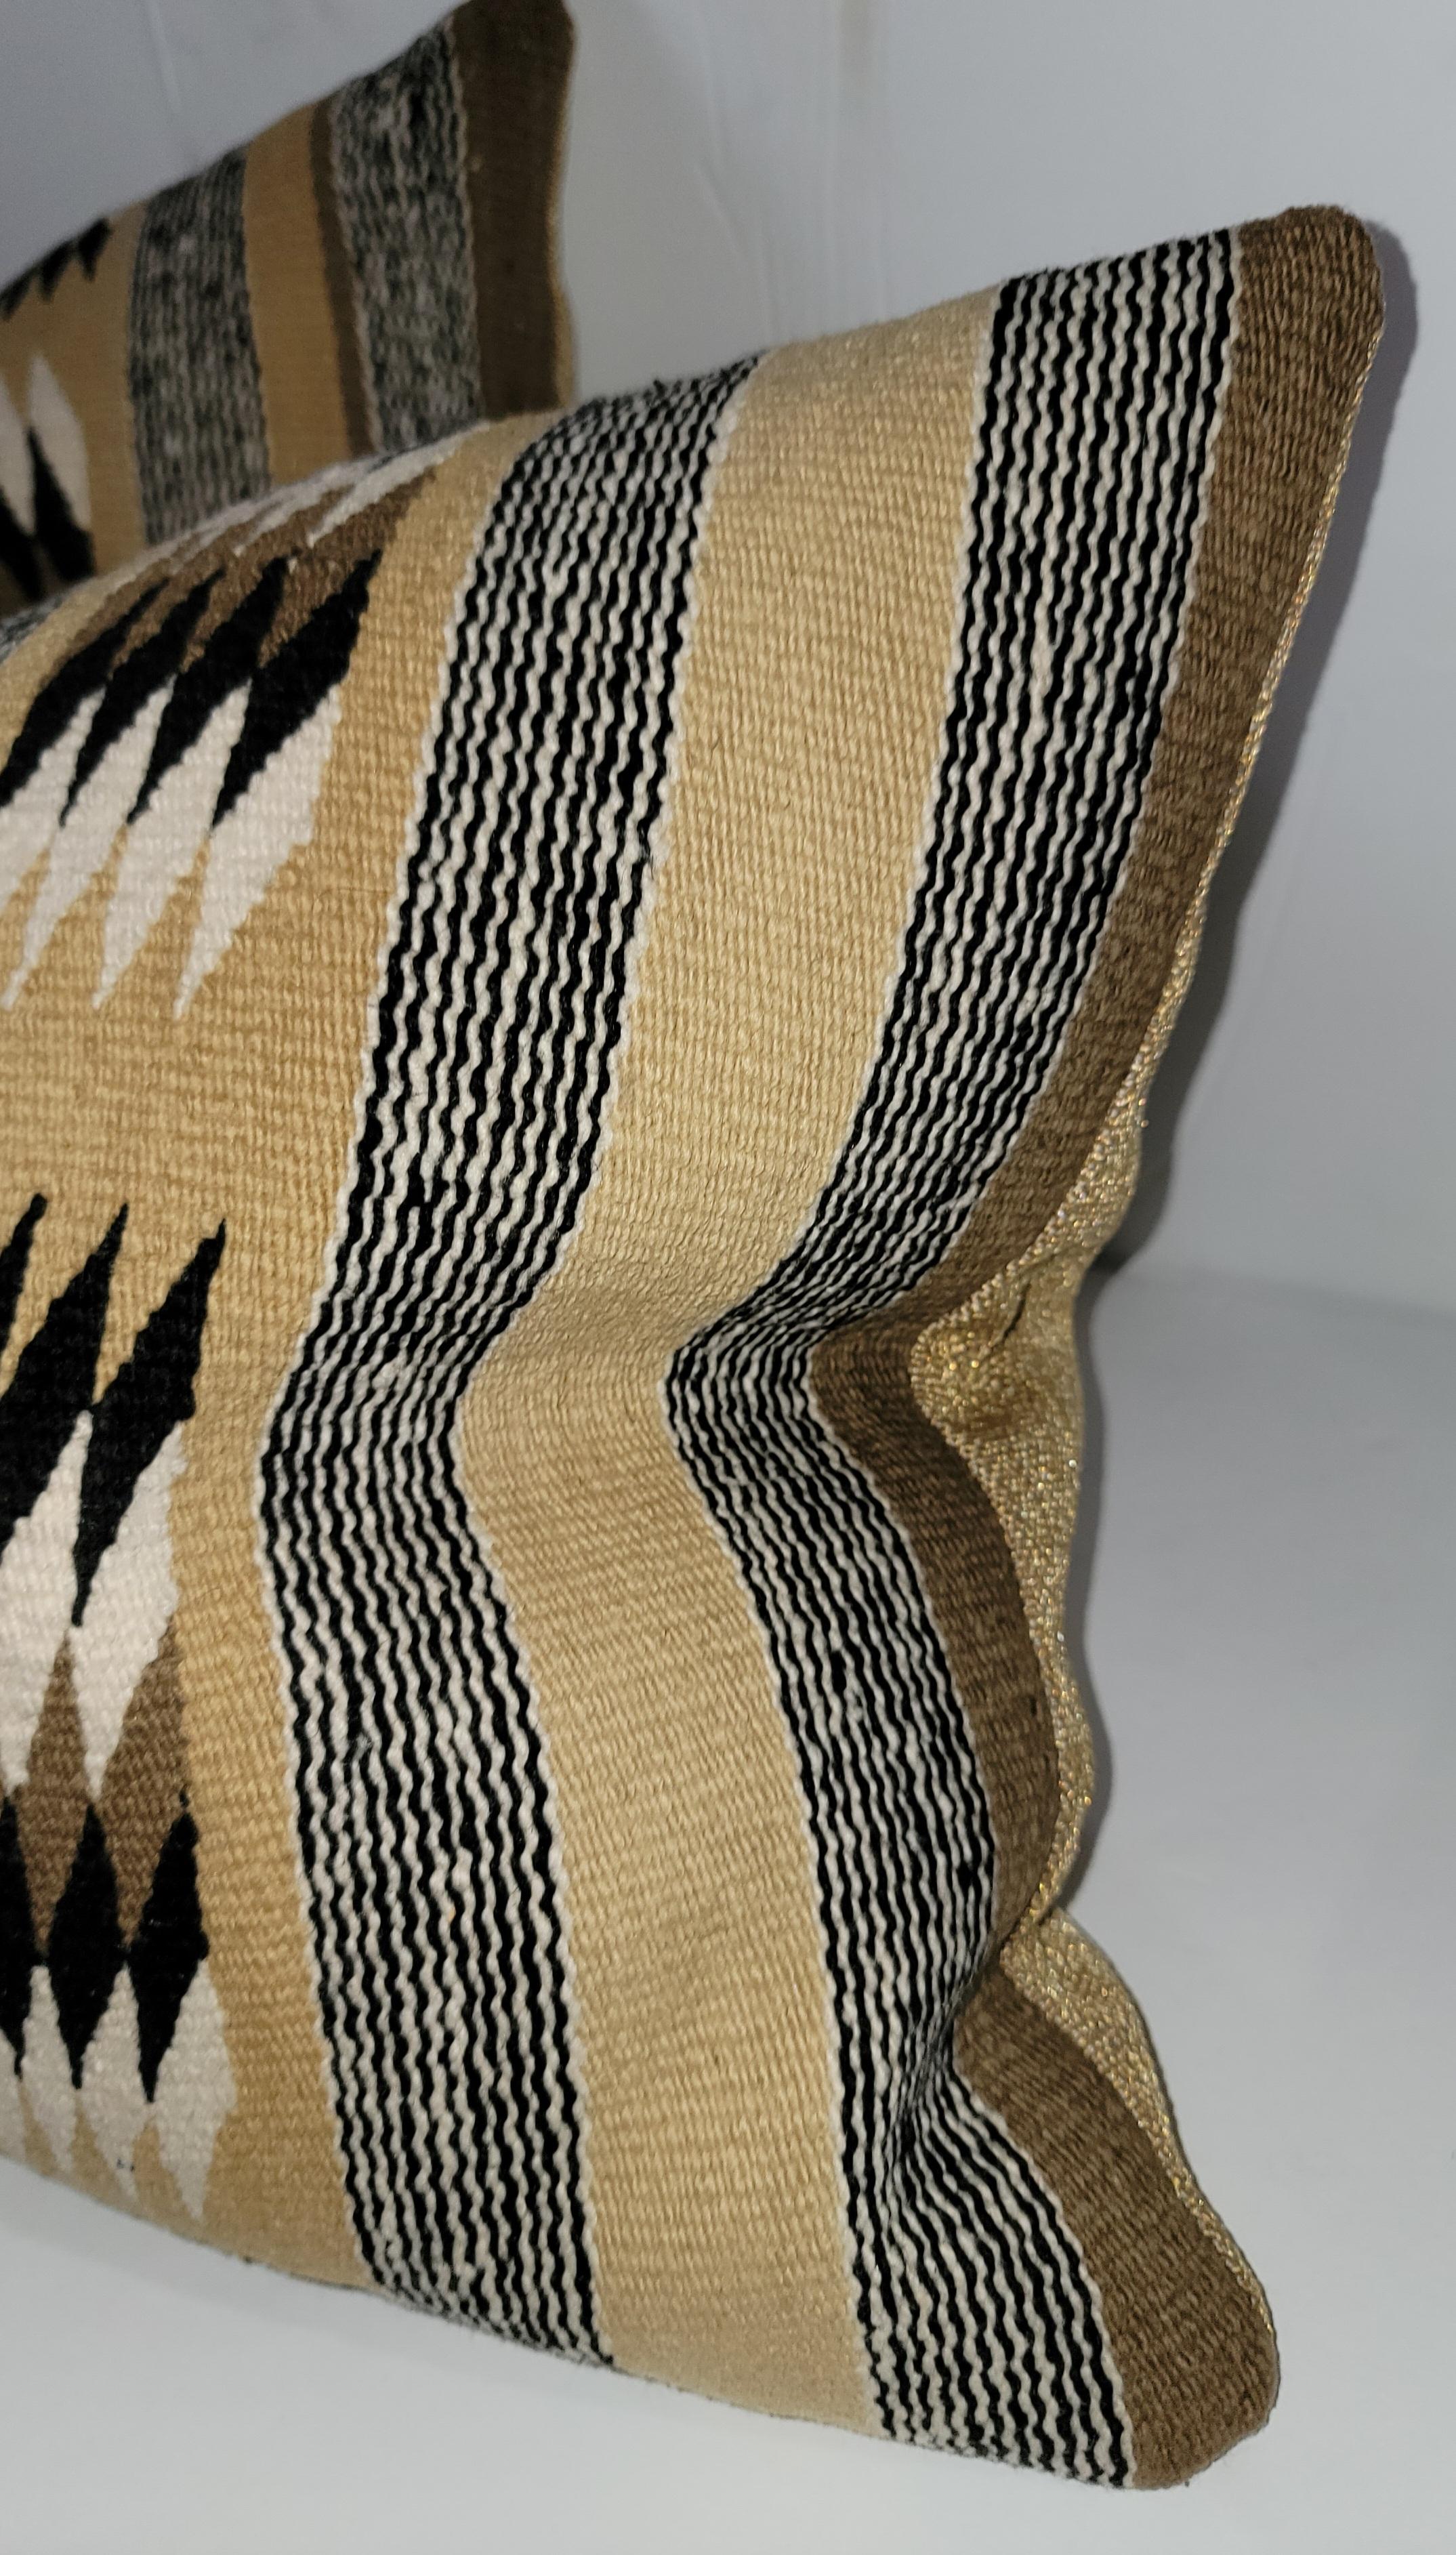 Navajo Chinle Indian weaving bolster pillows - pair. Feather and down insert and zippered shams.